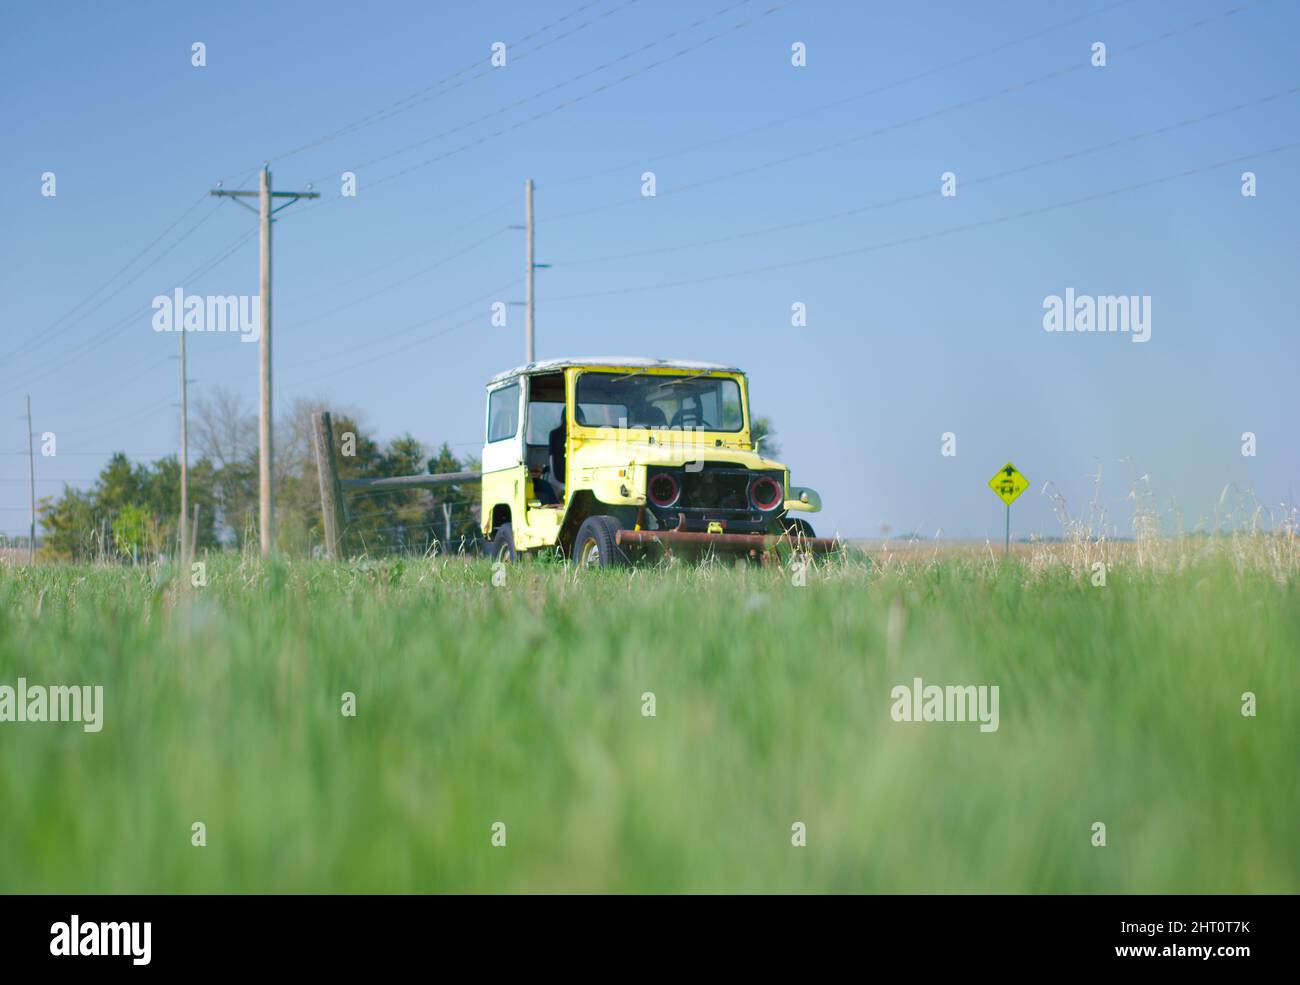 Beautiful shot of a yellow vintage Jeep in a field Stock Photo